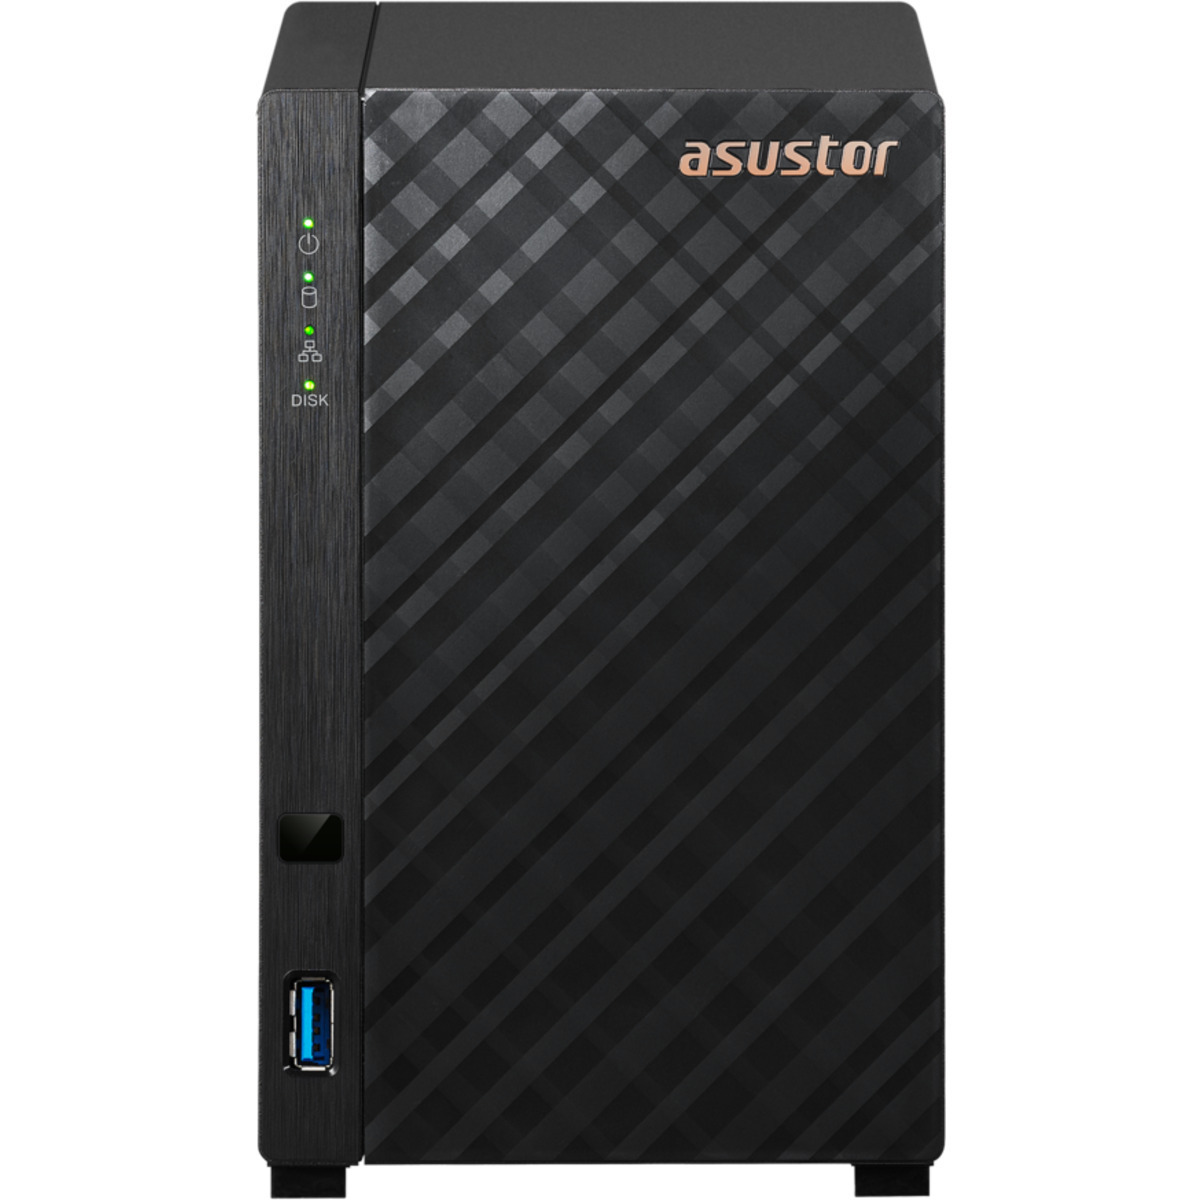 ASUSTOR DRIVESTOR 2 Lite AS1102TL 12tb 2-Bay Desktop Personal / Basic Home / Small Office NAS - Network Attached Storage Device 1x12tb Toshiba Enterprise Capacity MG07ACA12TE 3.5 7200rpm SATA 6Gb/s HDD ENTERPRISE Class Drives Installed - Burn-In Tested DRIVESTOR 2 Lite AS1102TL